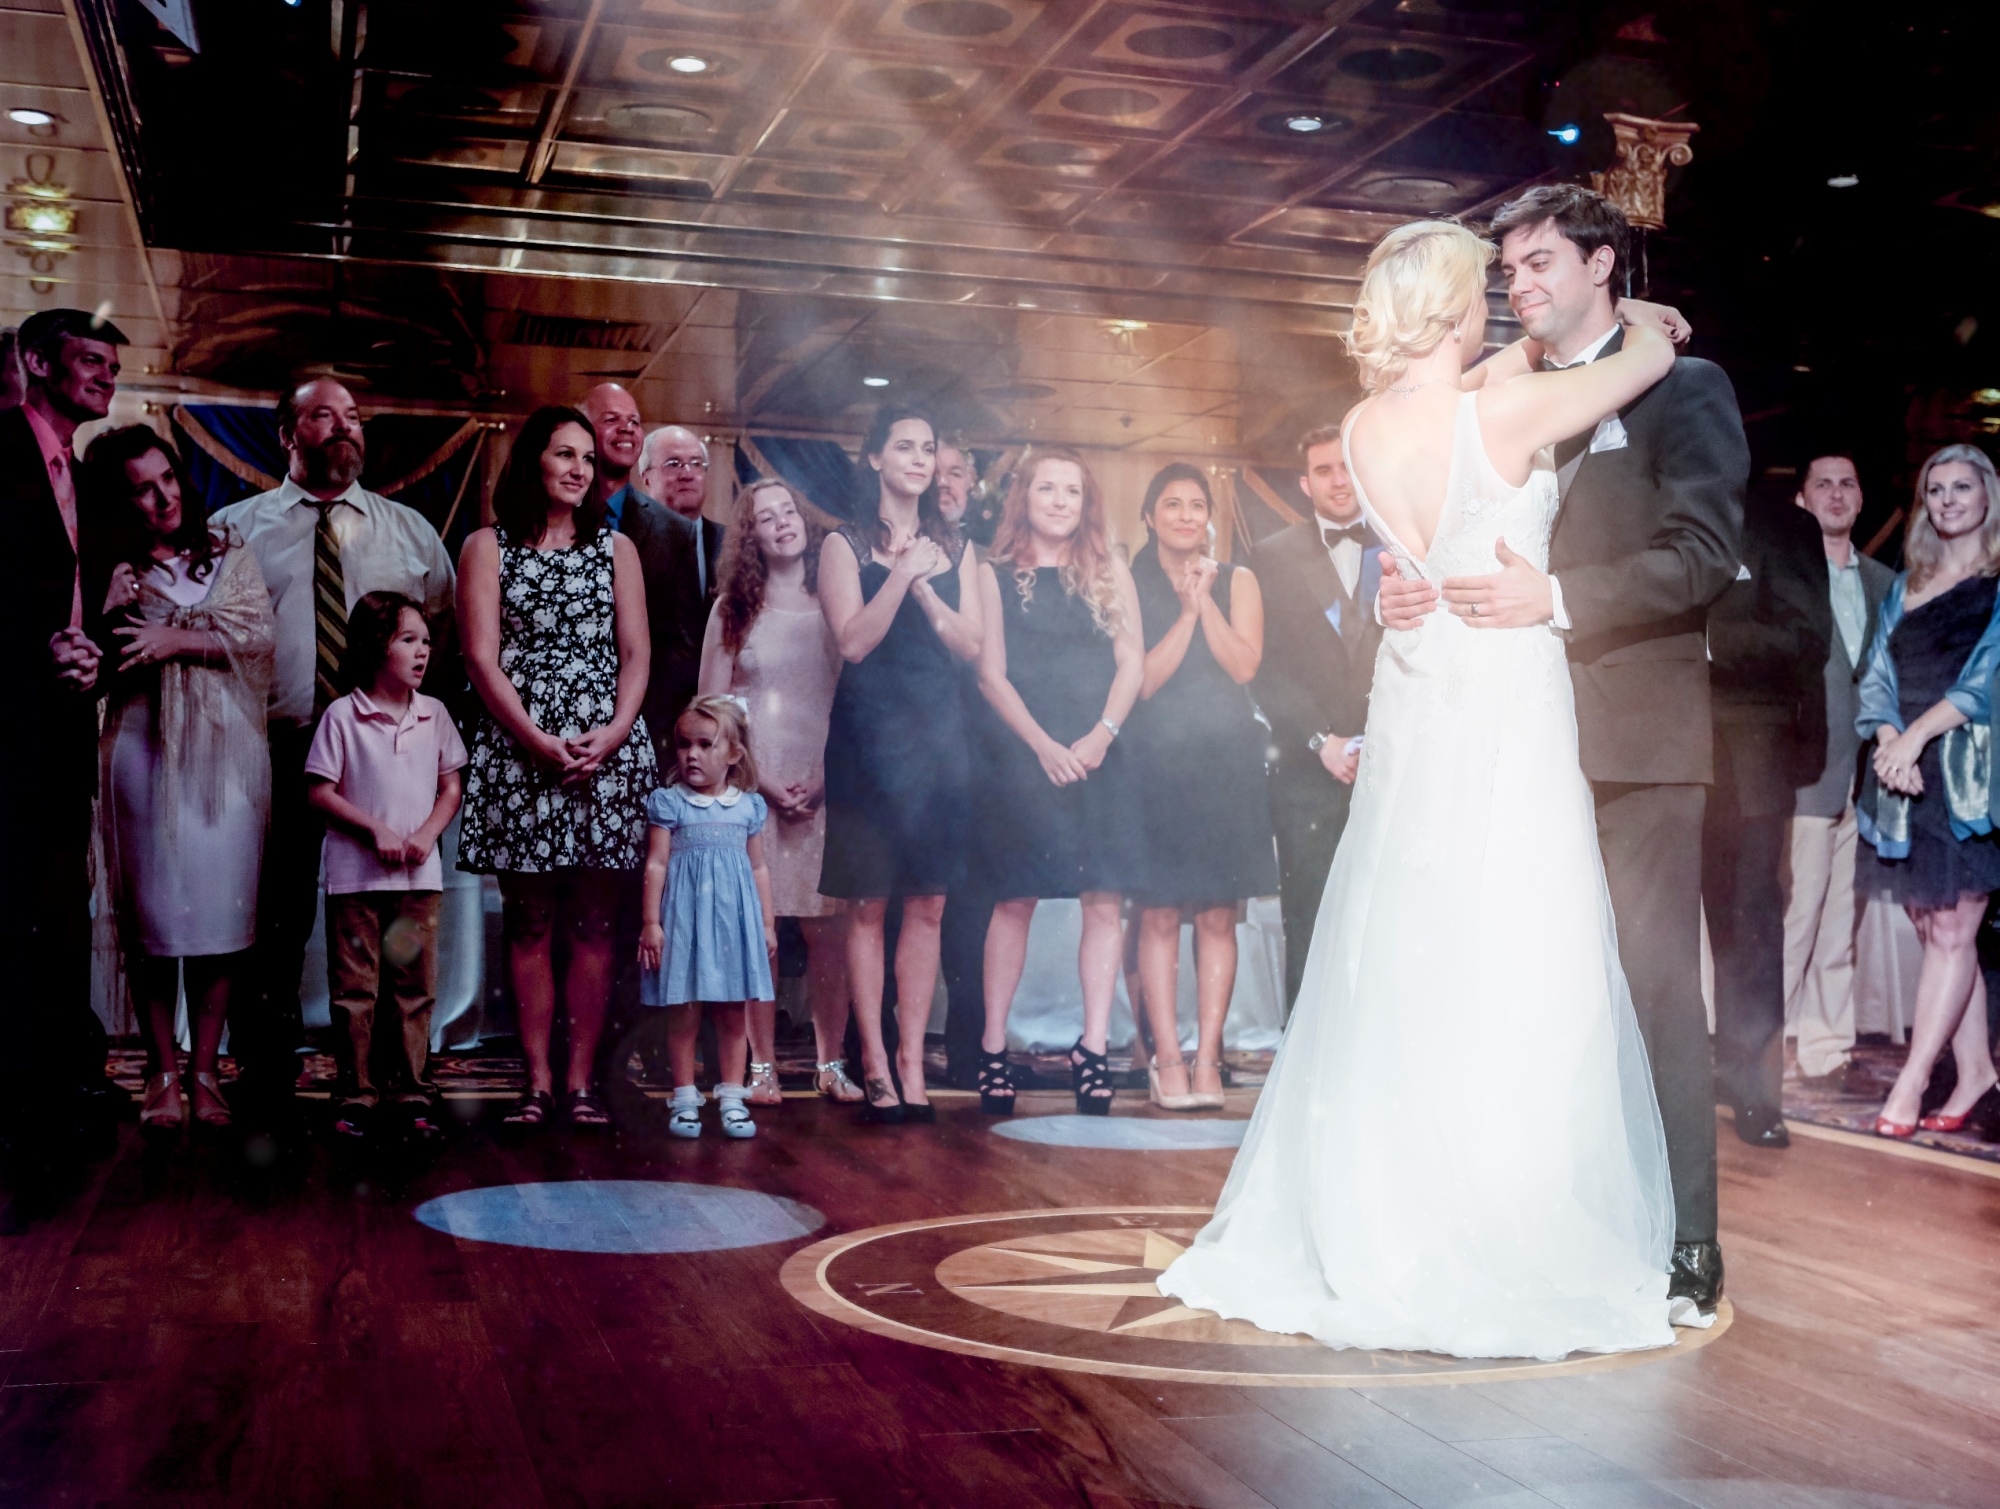 Make your dreams come true for your special day by having your wedding reception on board with us!